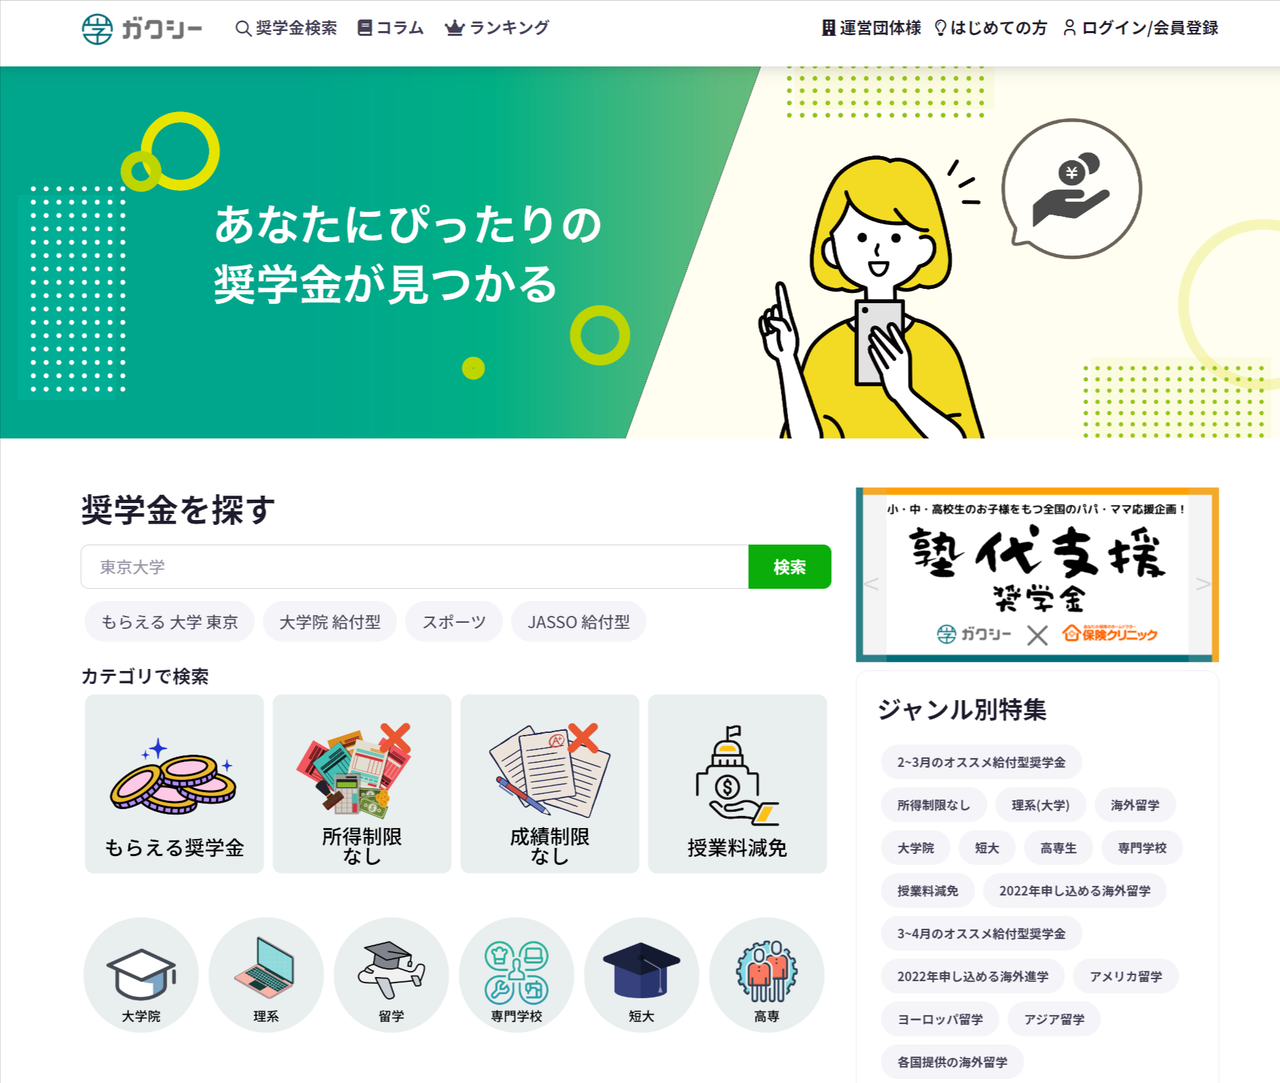 Gaxie is the largest scholarship website in Japan.